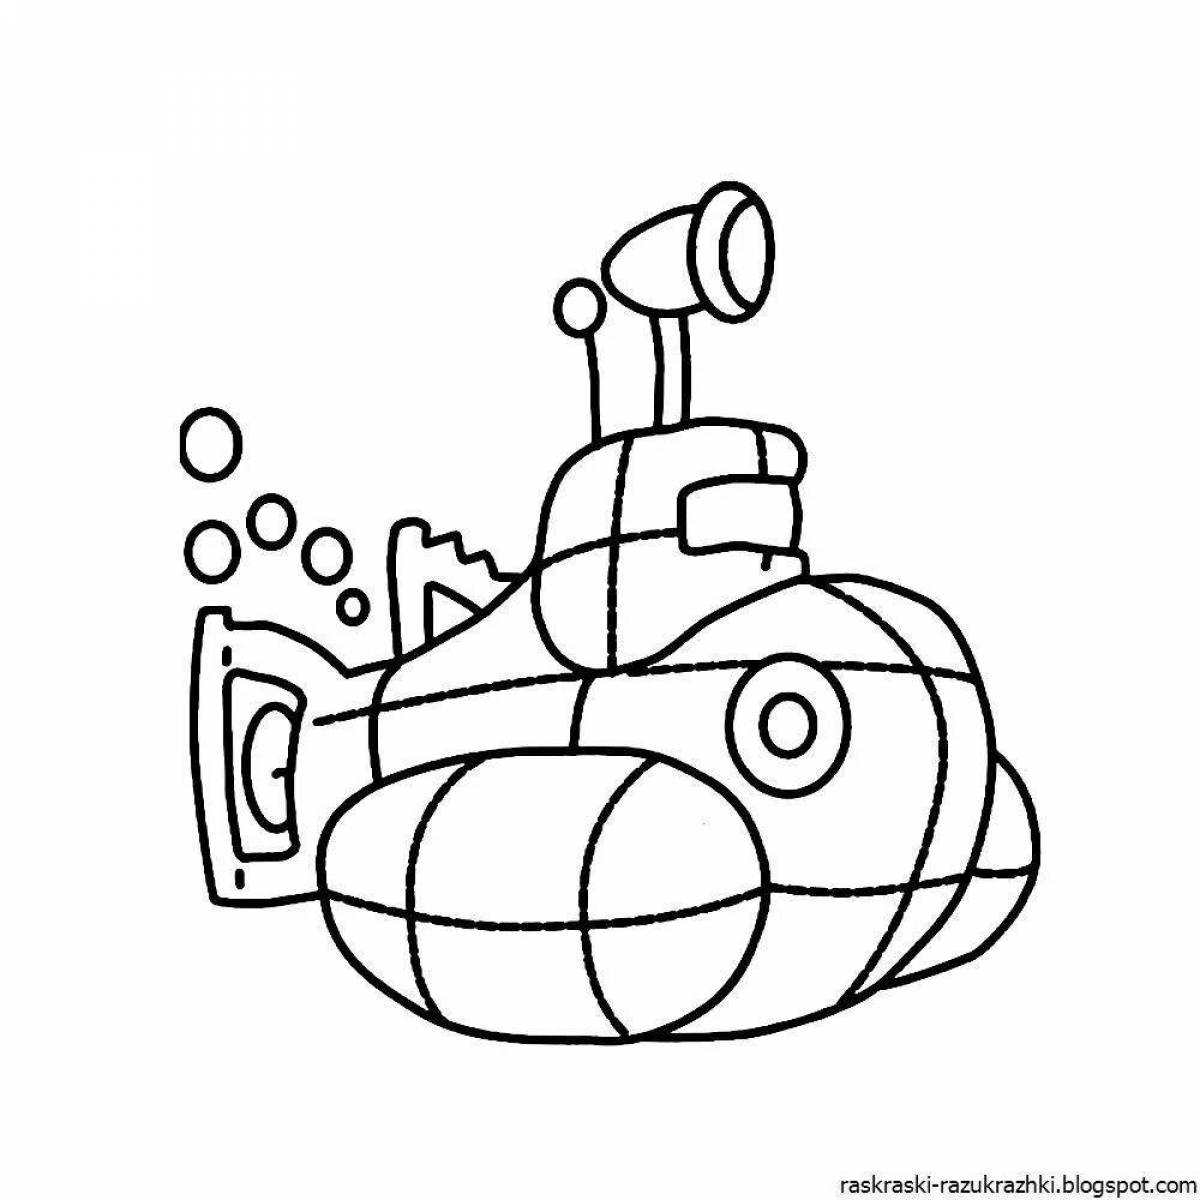 Wonderful submarine coloring book for kids 5-6 years old